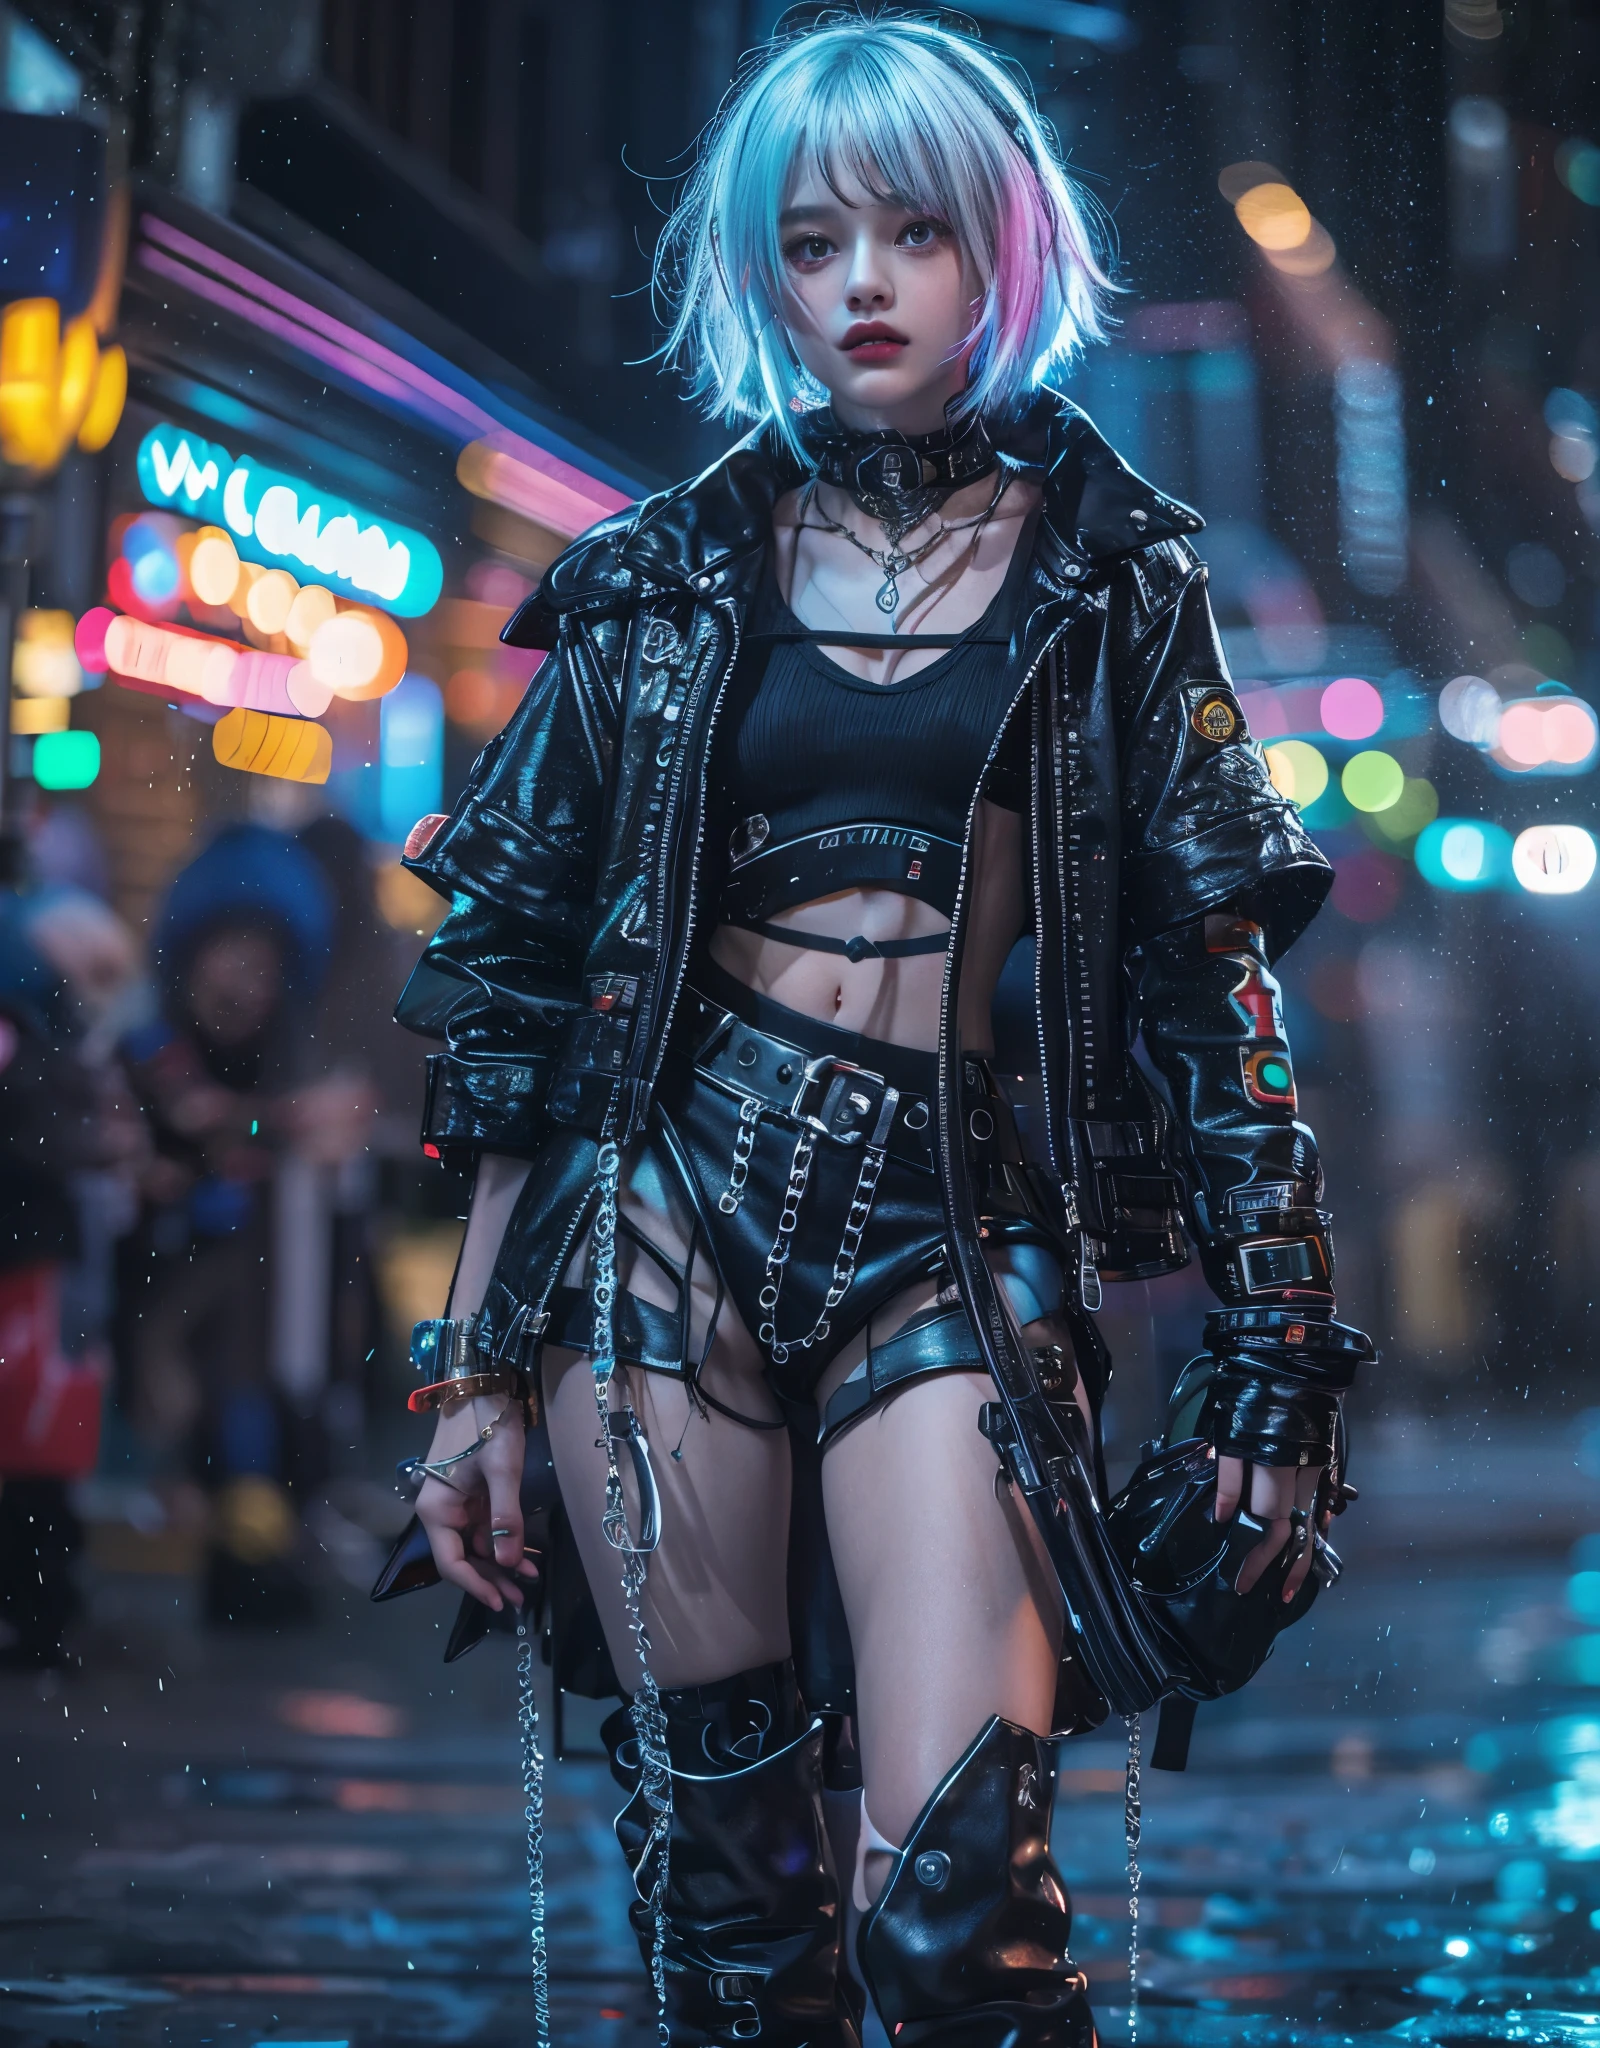 silver-haired beautiful girl, cyberpunk accessories, black crop top, glossy high-collar jacket, multi-layered asymmetrical long skirt, fashionable boots, neon-speckled night city, warm streetlights, her shining under the lights, mist effect